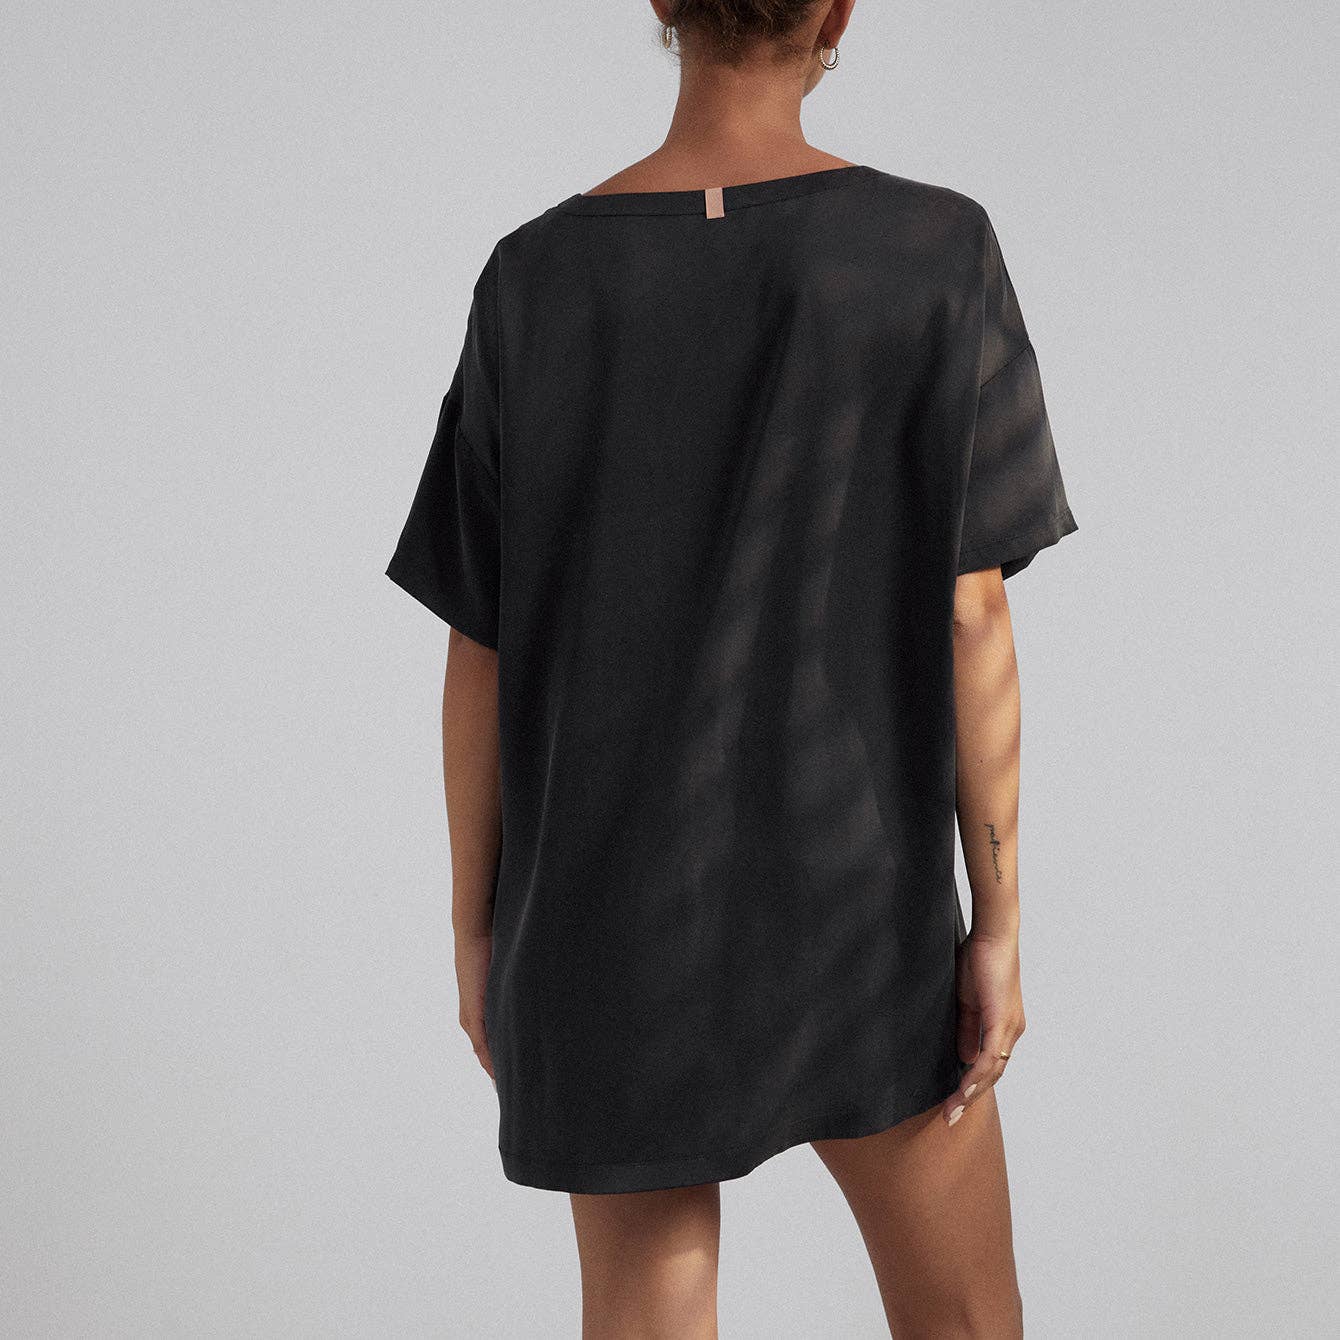 Lunya Washable Silk Tee Set in Immersed Black, available at LaSource in Darien